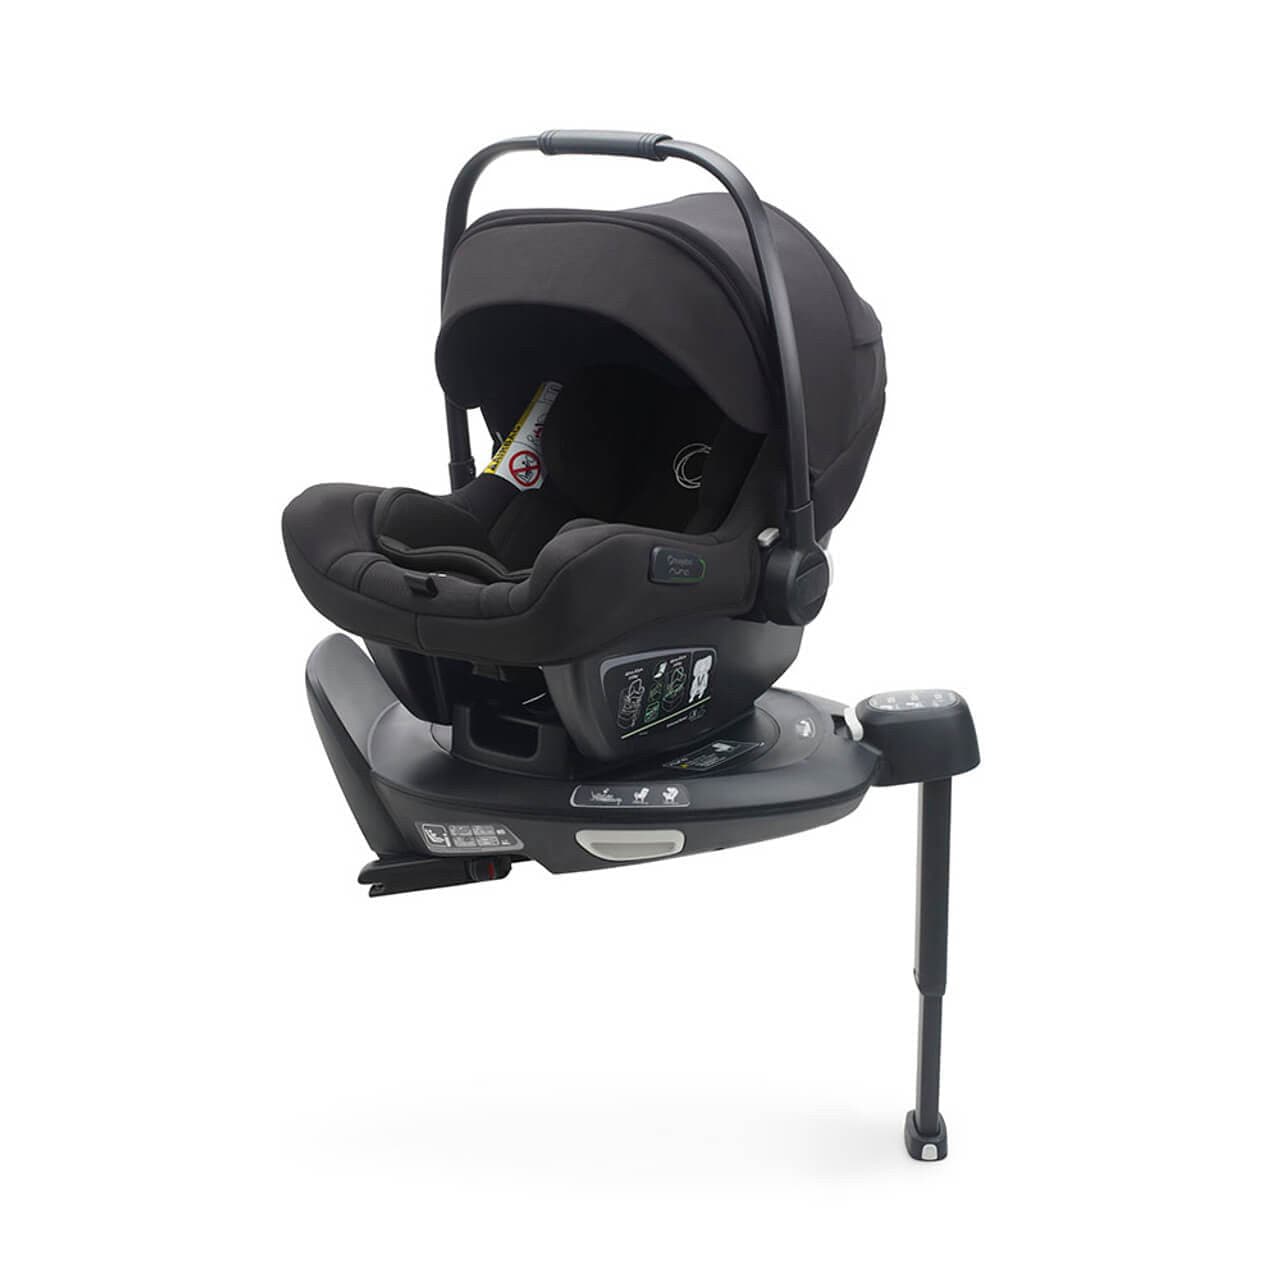 Bugaboo Dragonfly Ultimate Travel System Bundle - Skyline Blue - For Your Little One